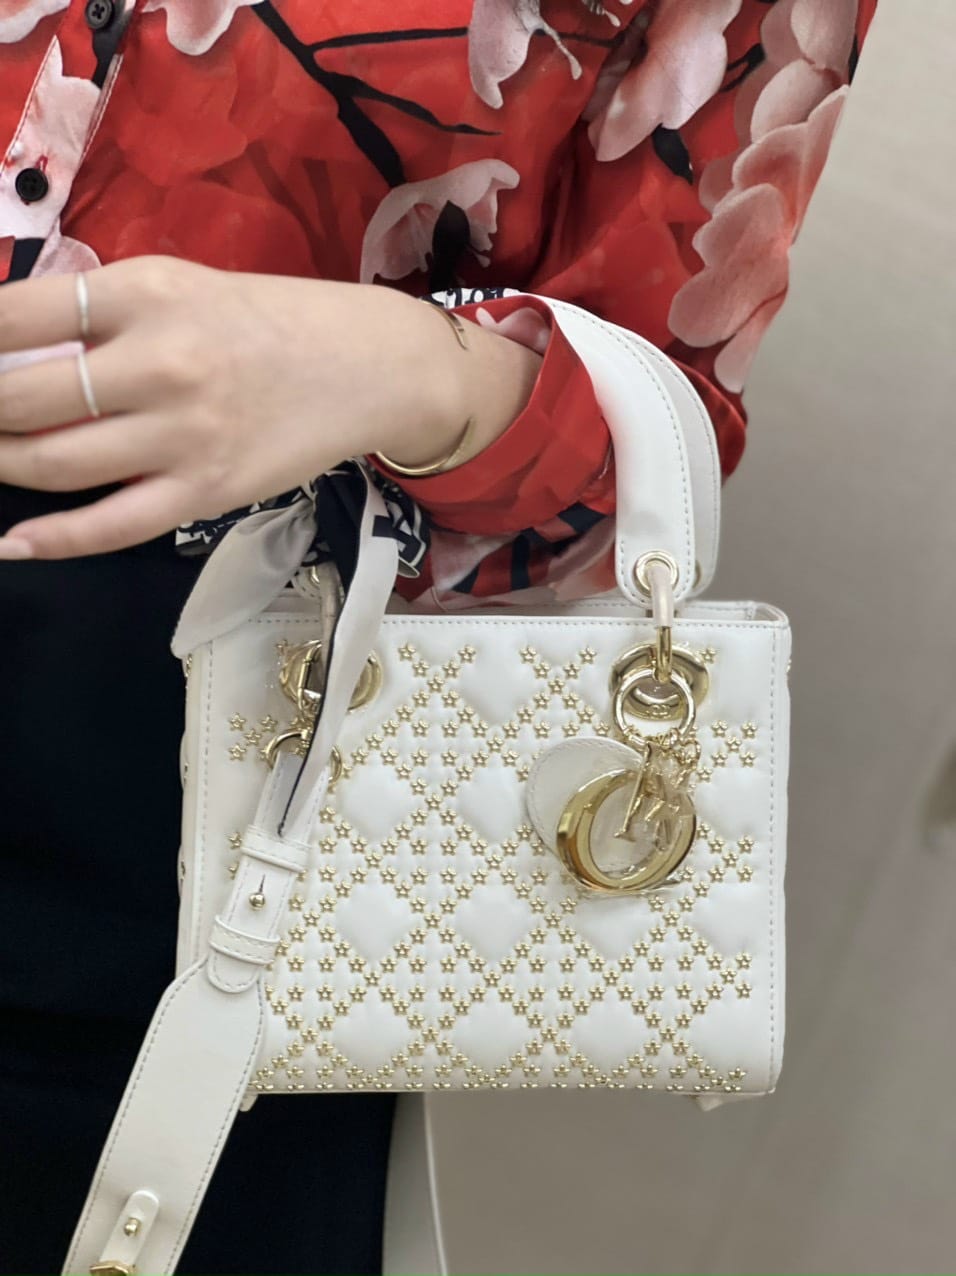 Buy Preowned  Brand new Luxury Dior Mini Lady Dior Bag Online   LuxepolisCom